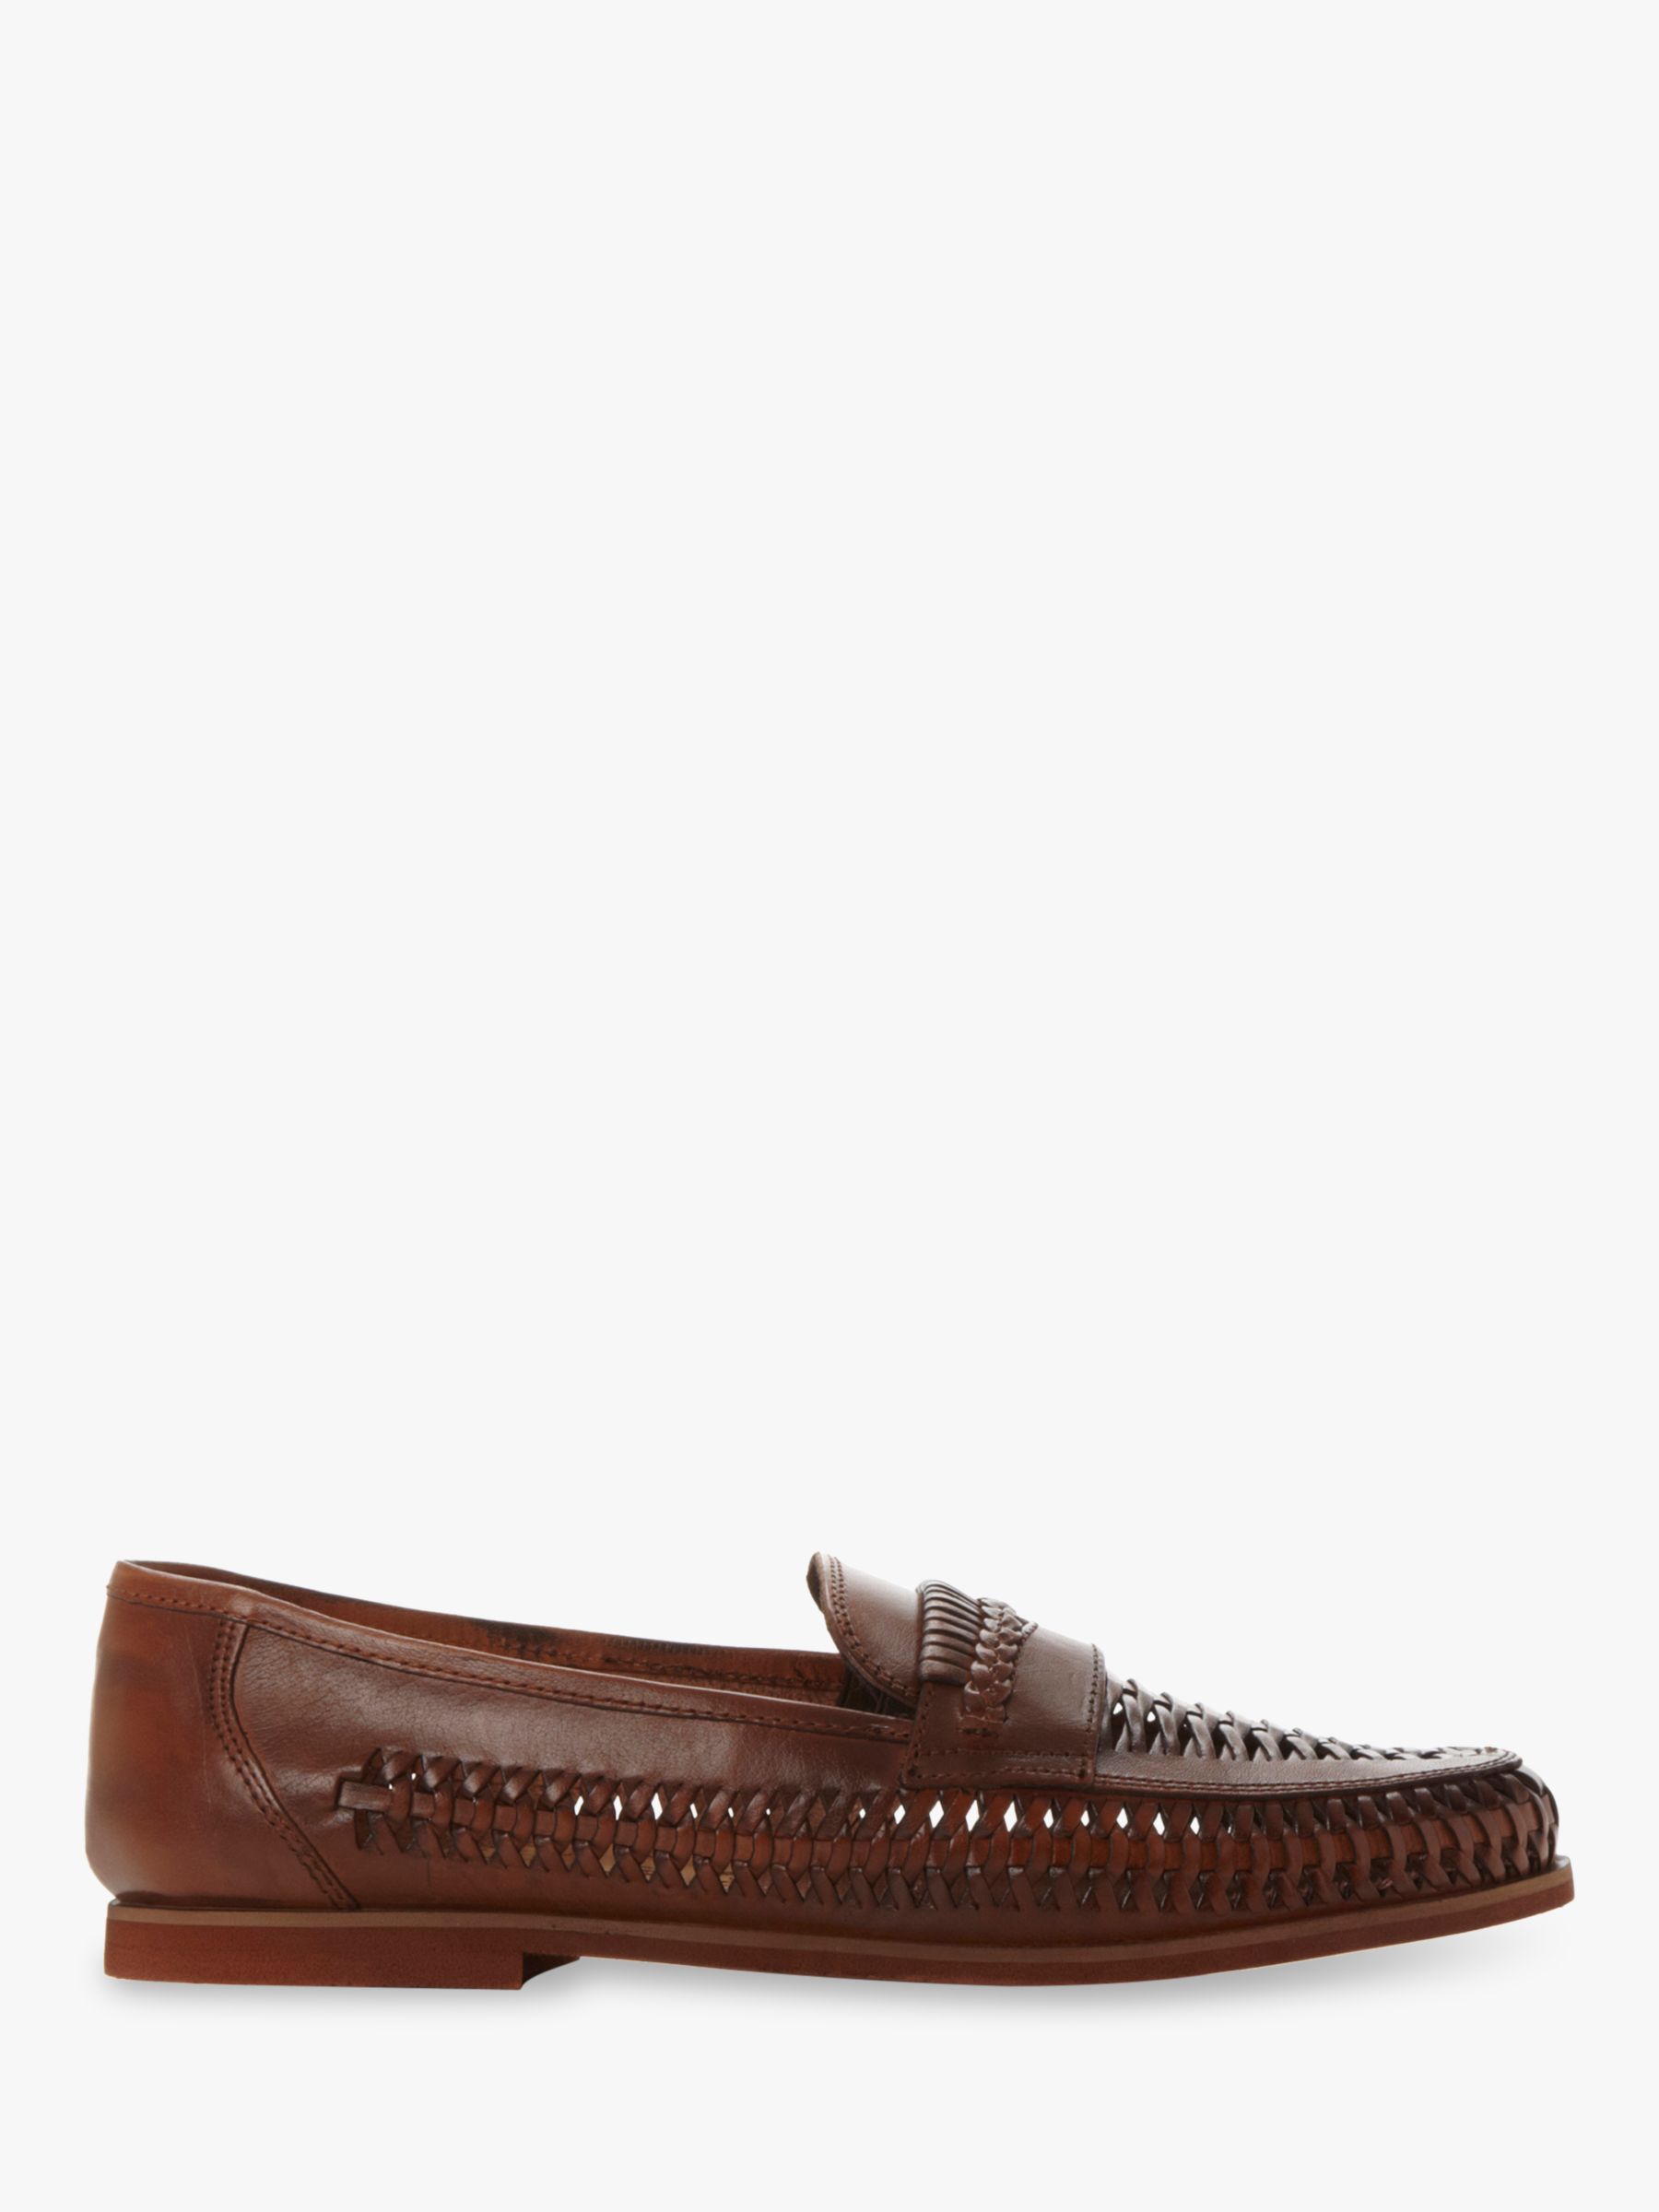 Dune Brighton Rock Woven Leather Loafers, Tan at John Lewis & Partners